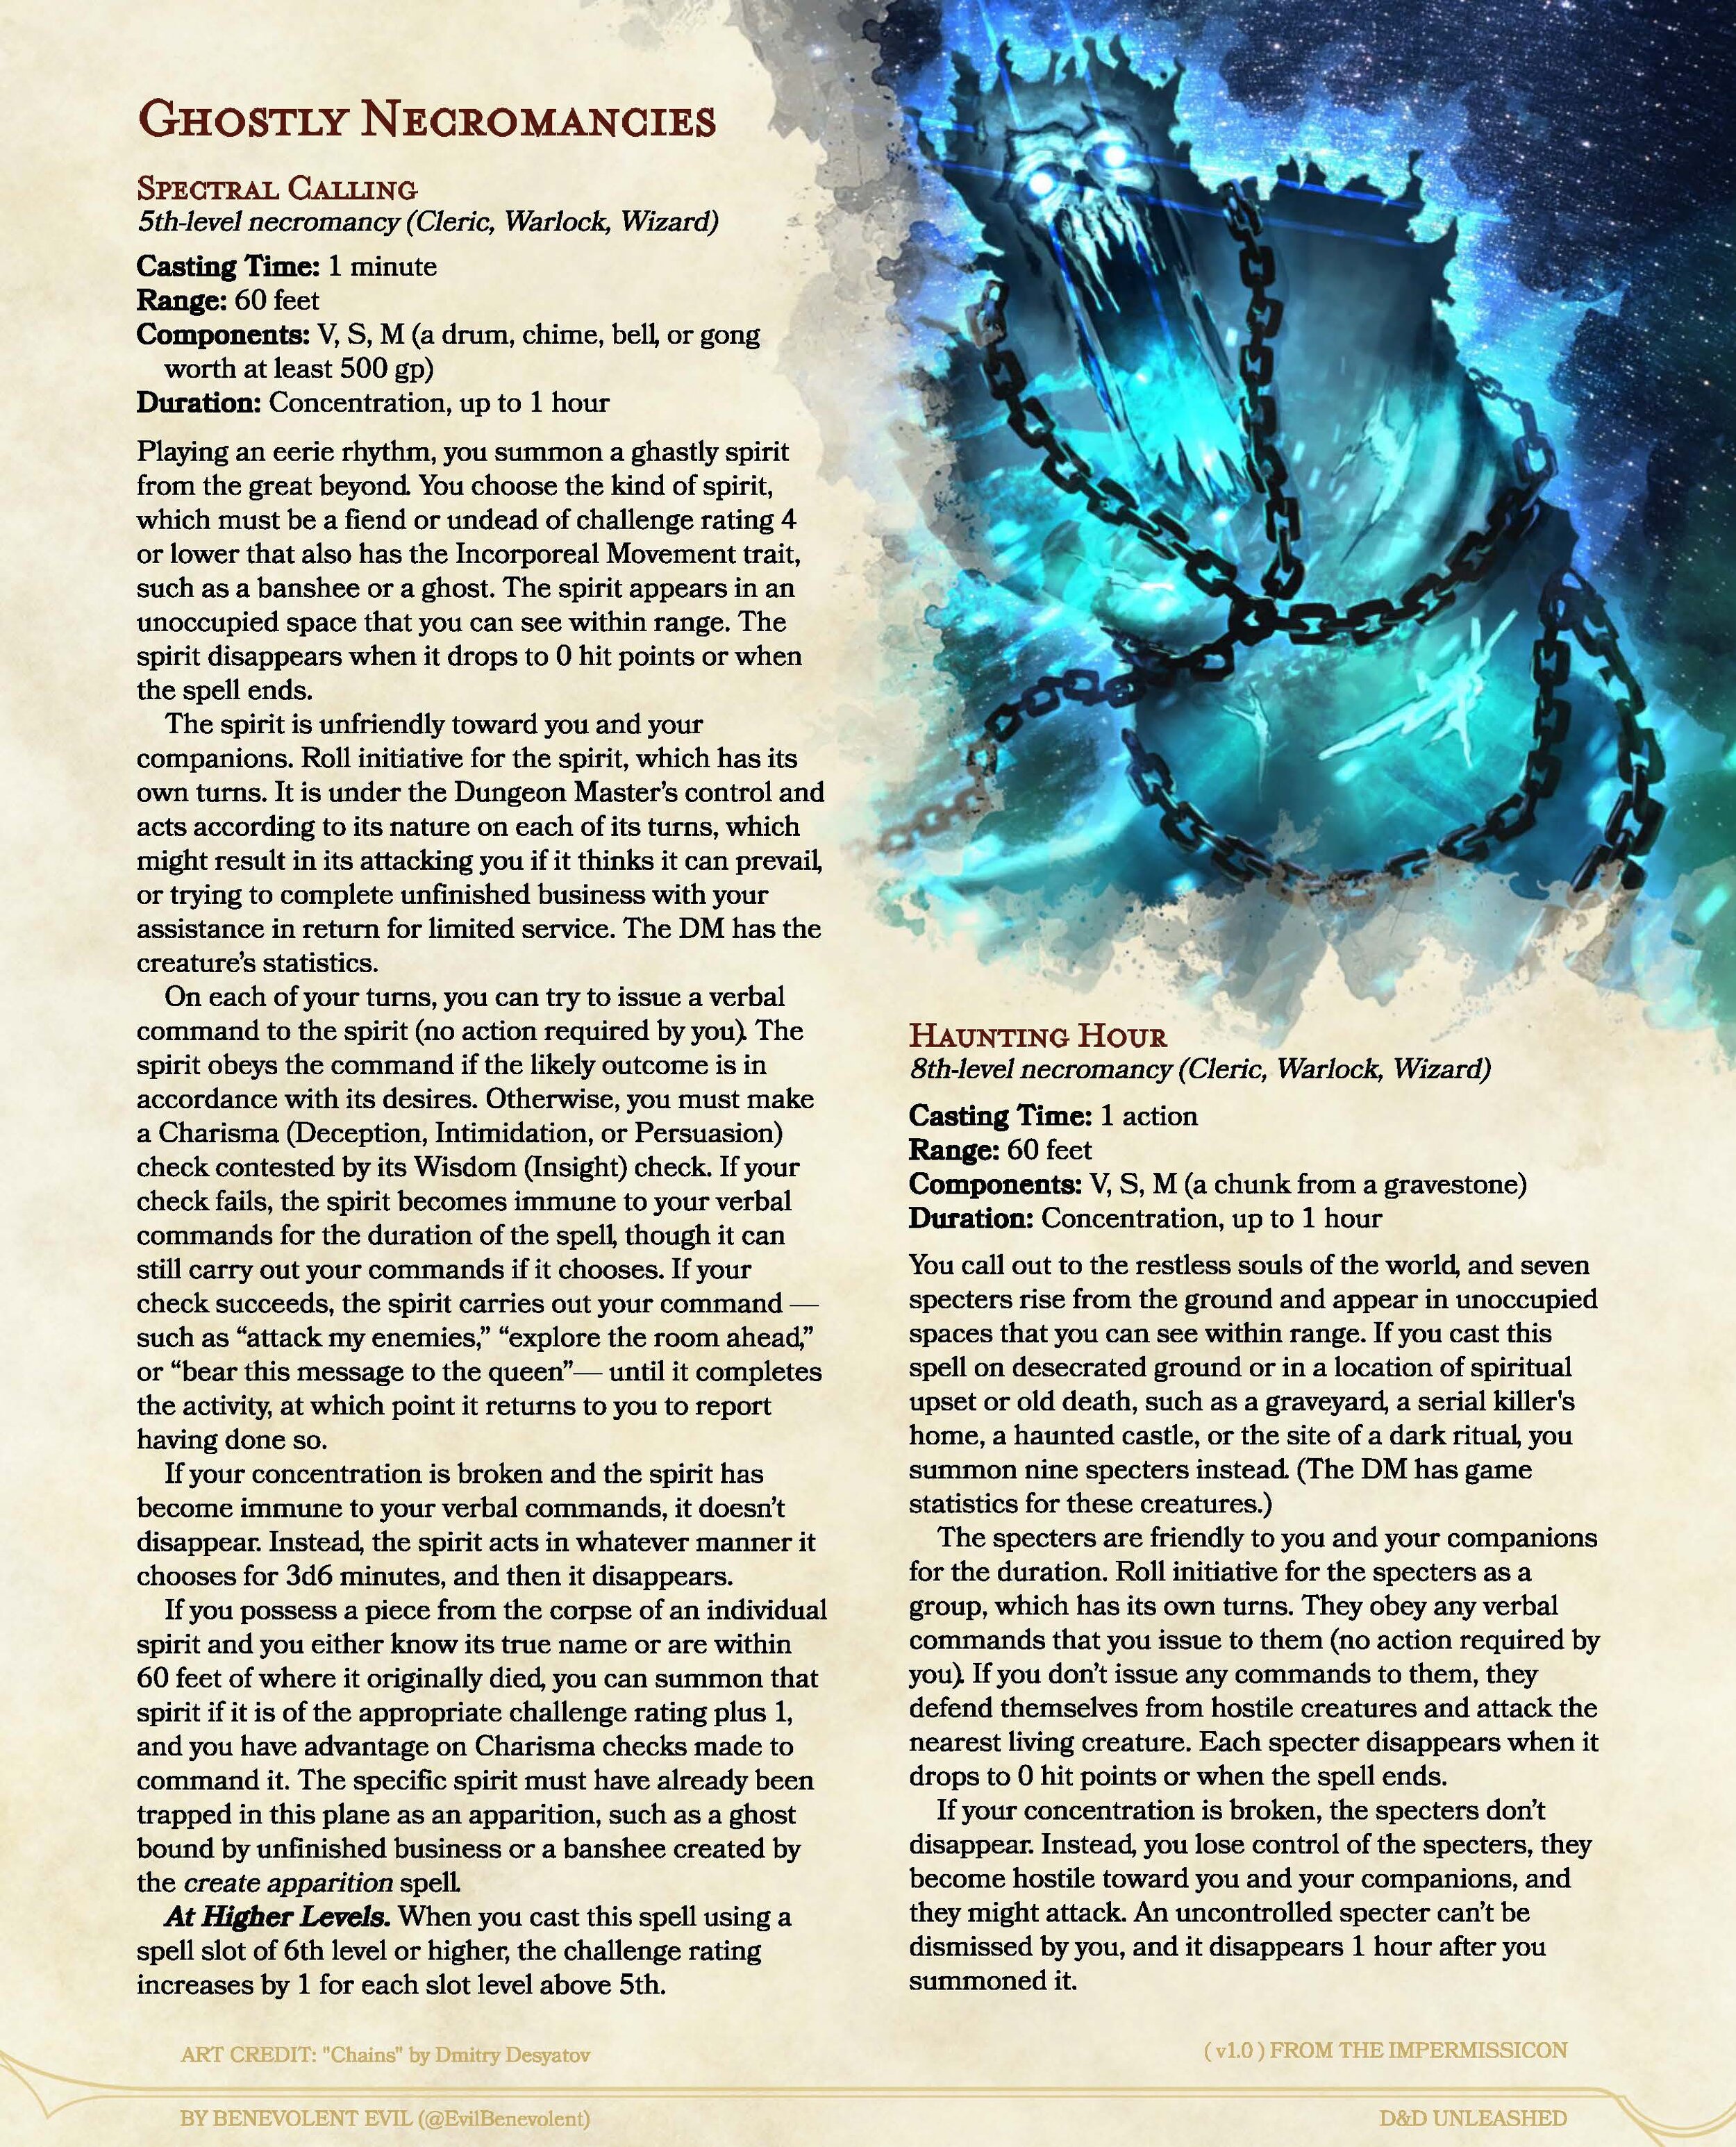 New Spells Ghostly Necromancies Dnd Unleashed A Homebrew Expansion For 5th Edition Dungeons And Dragons